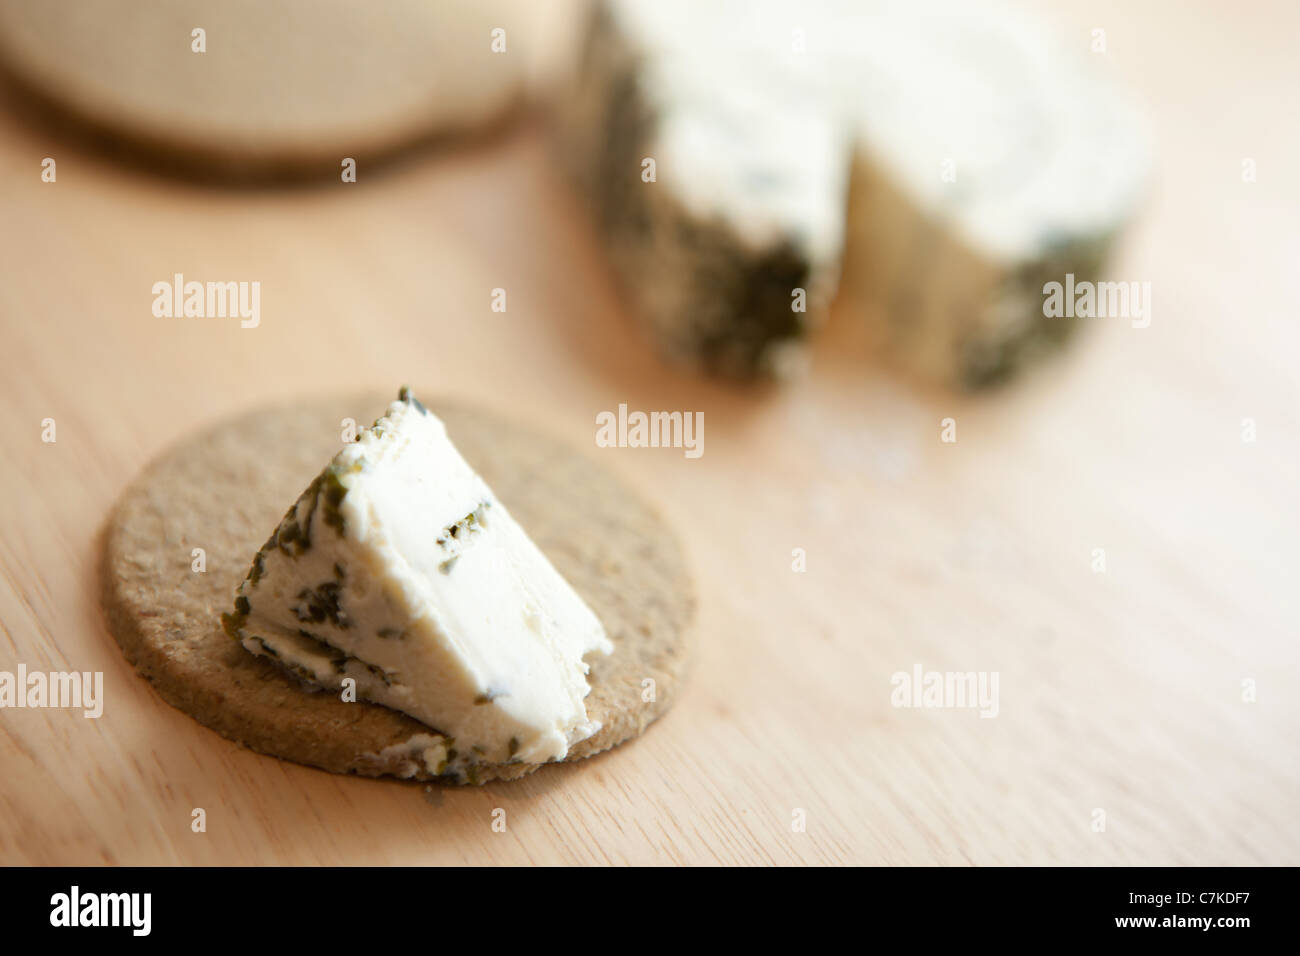 An oatcake with a slice of garlic and herb cream cheese, with oatcakes and cheese in the background against a wooden surface Stock Photo